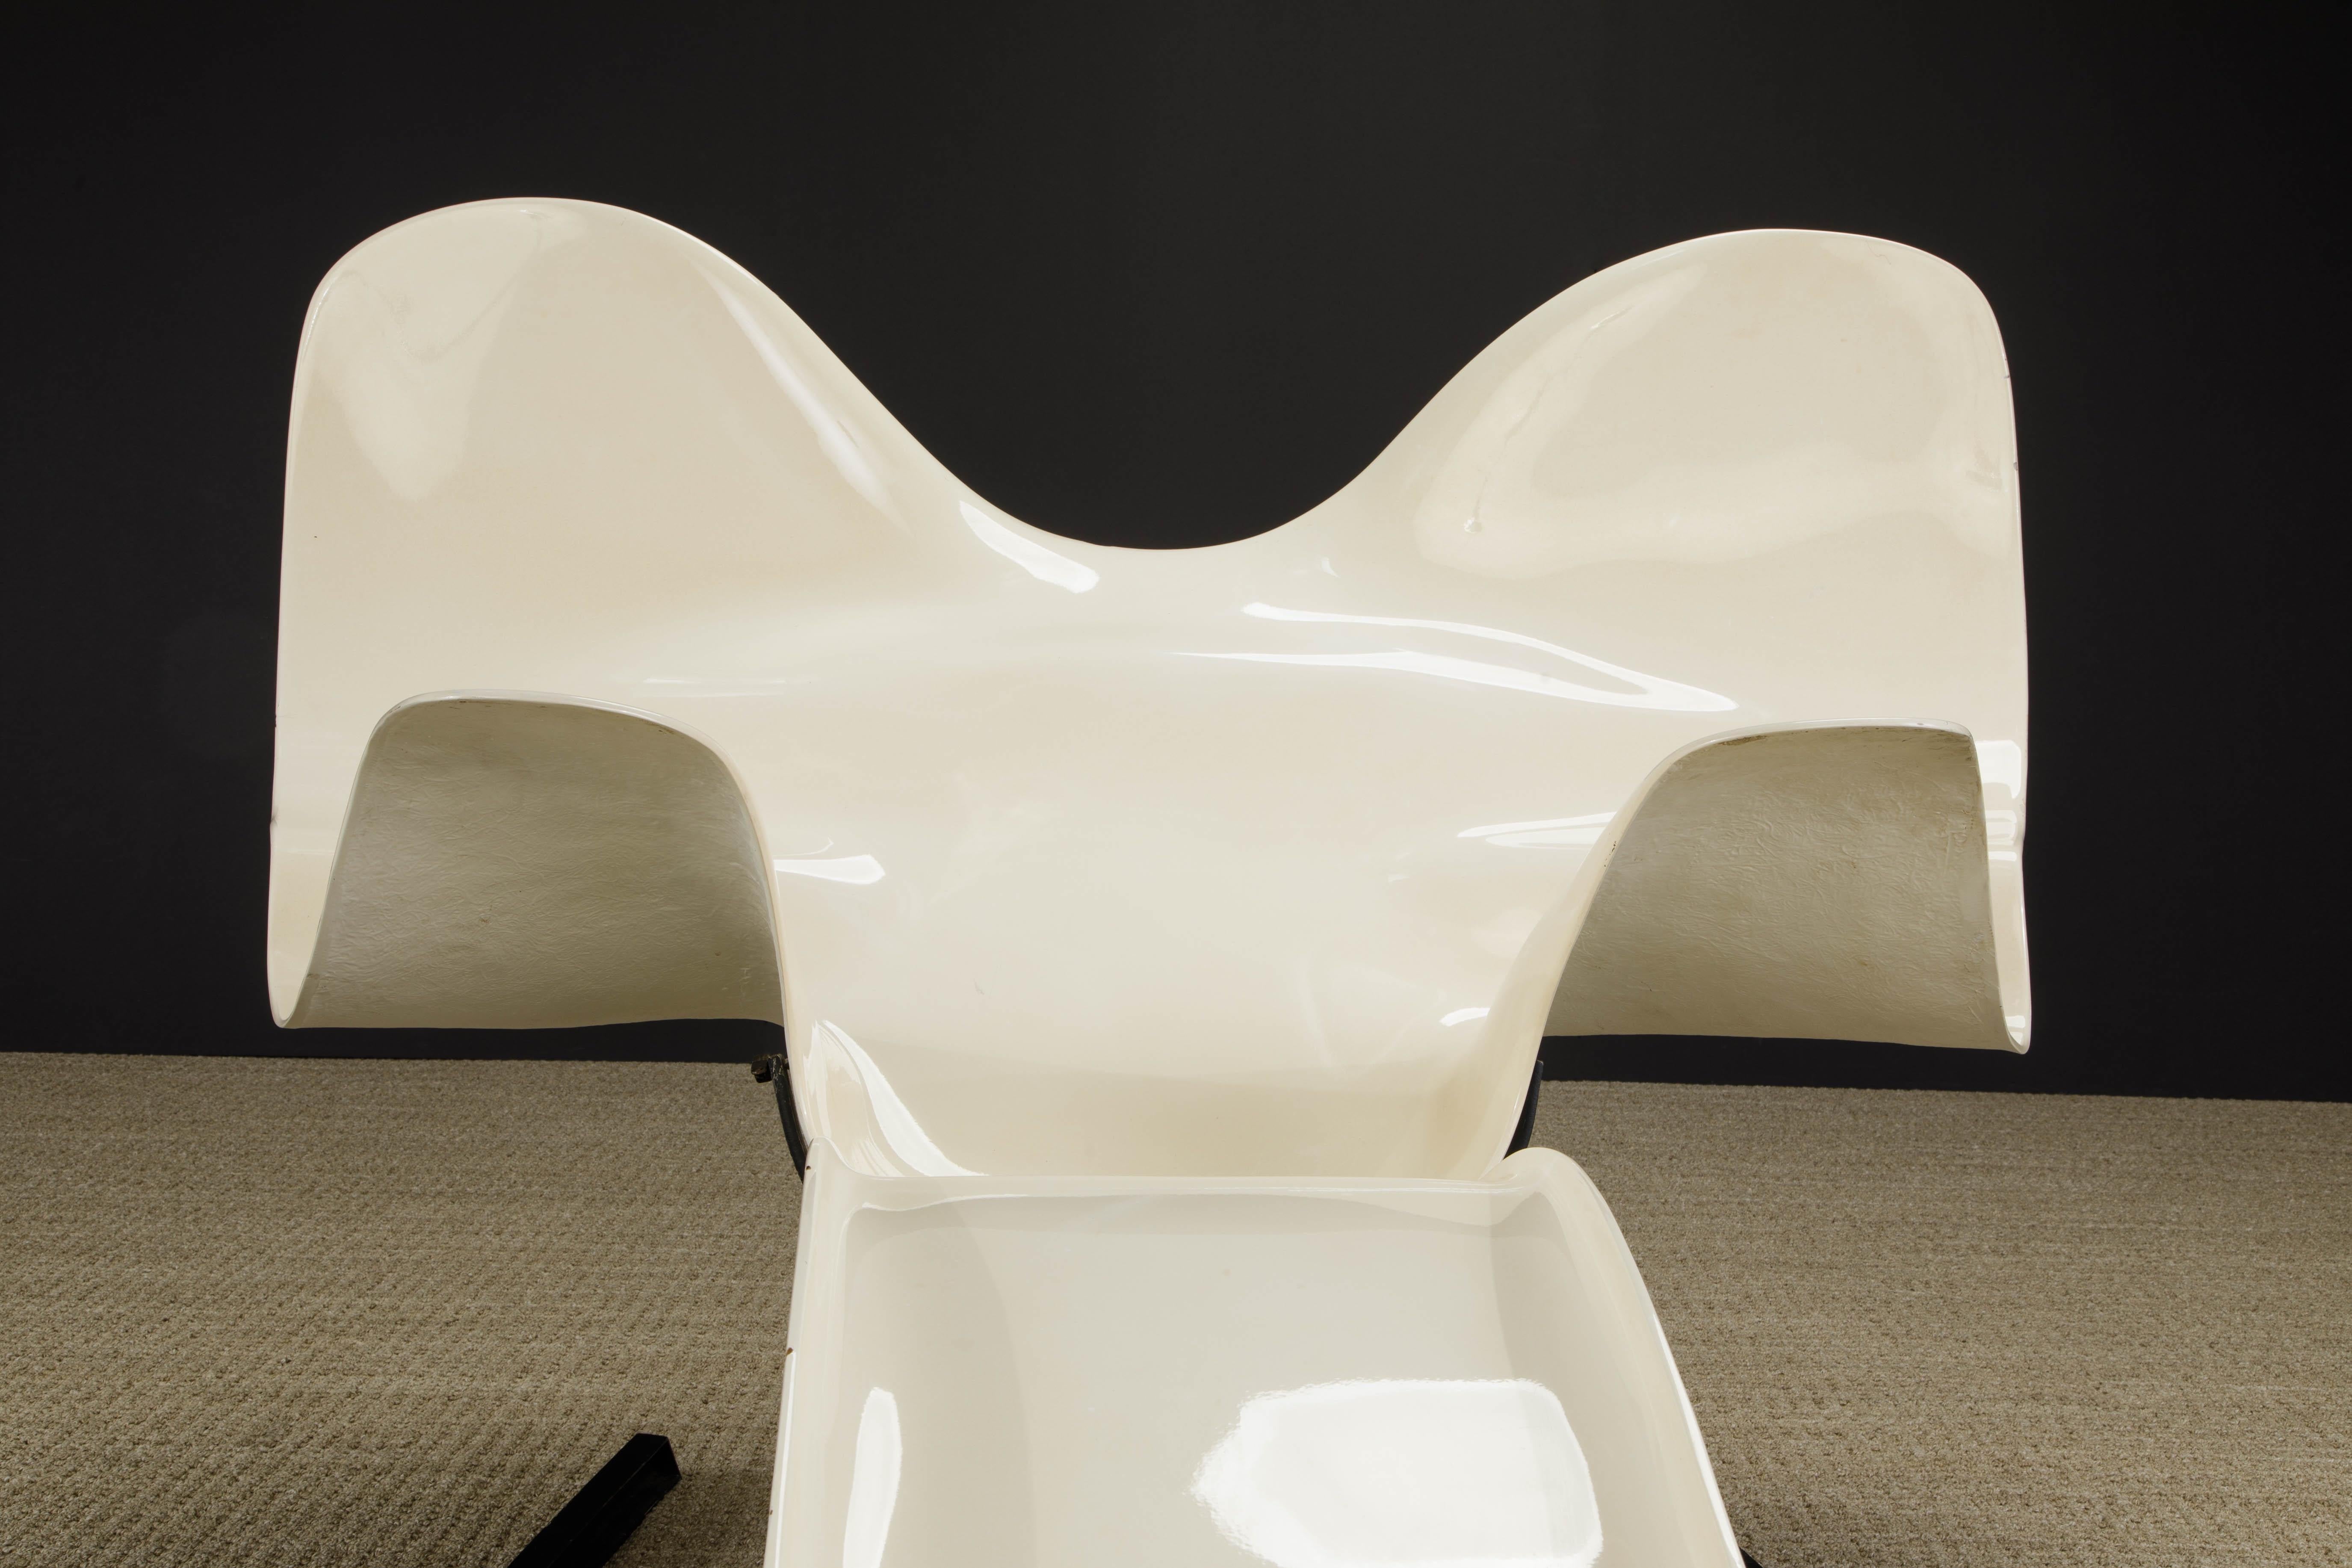 Late 20th Century Limited Edition 'Elephant Chair' by Bernard Rancillac, 1985, Signed & Numbered